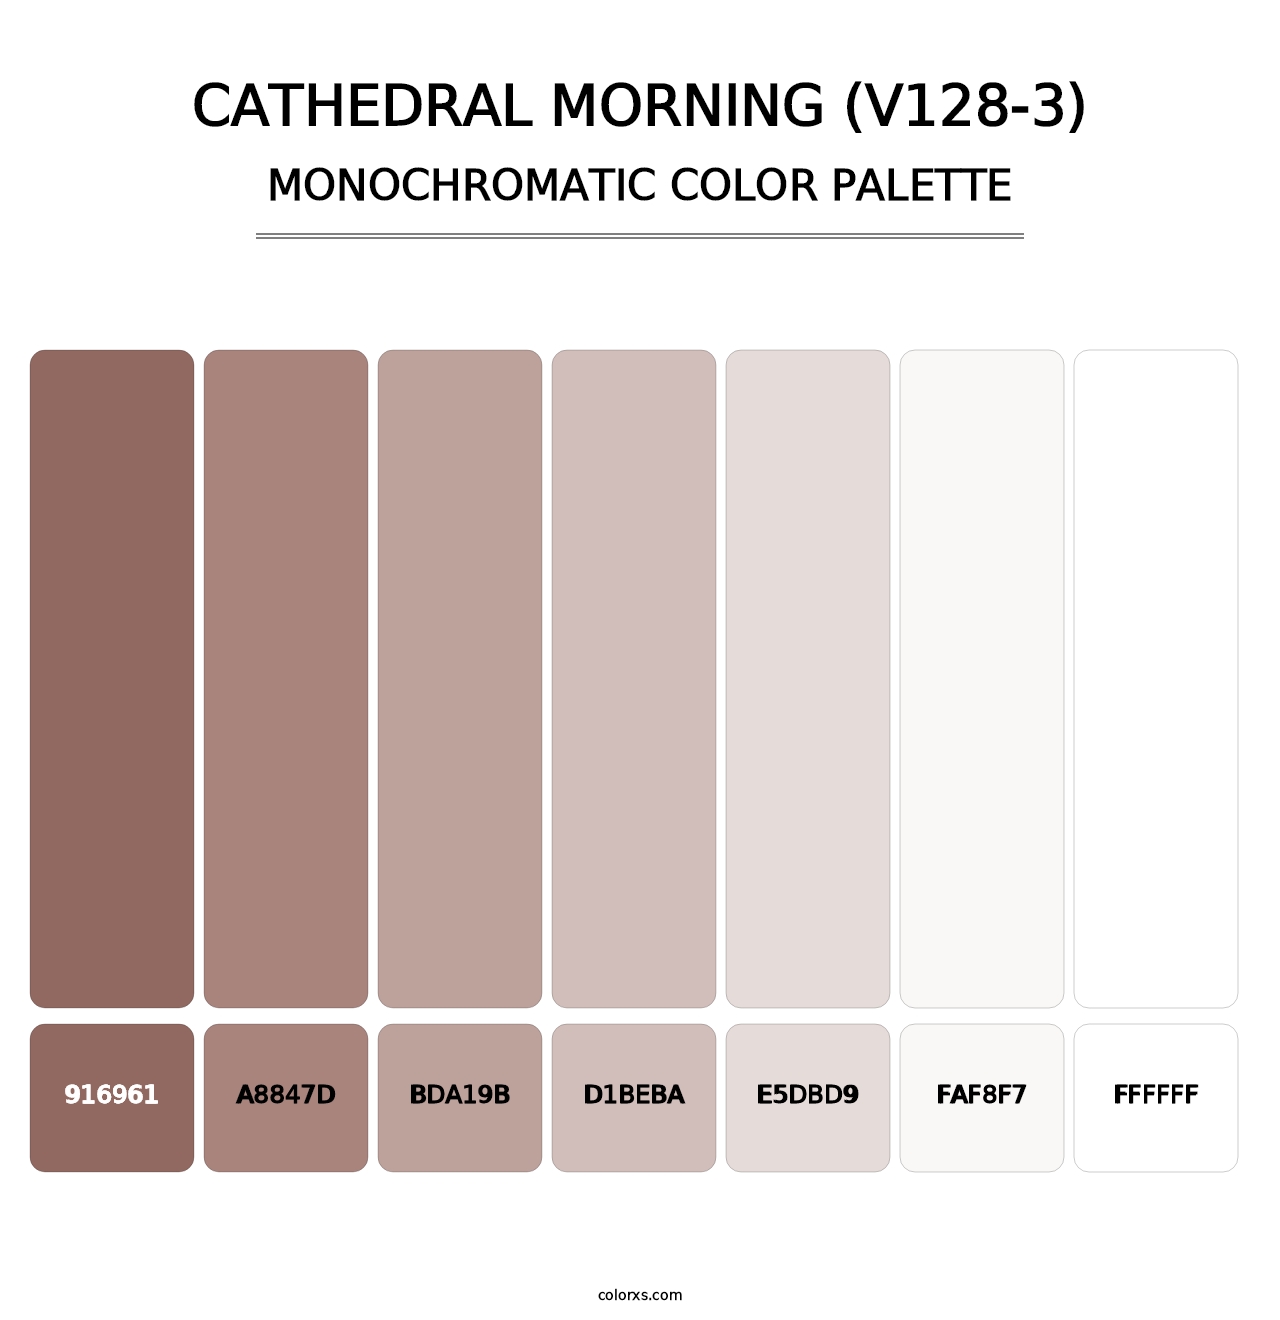 Cathedral Morning (V128-3) - Monochromatic Color Palette